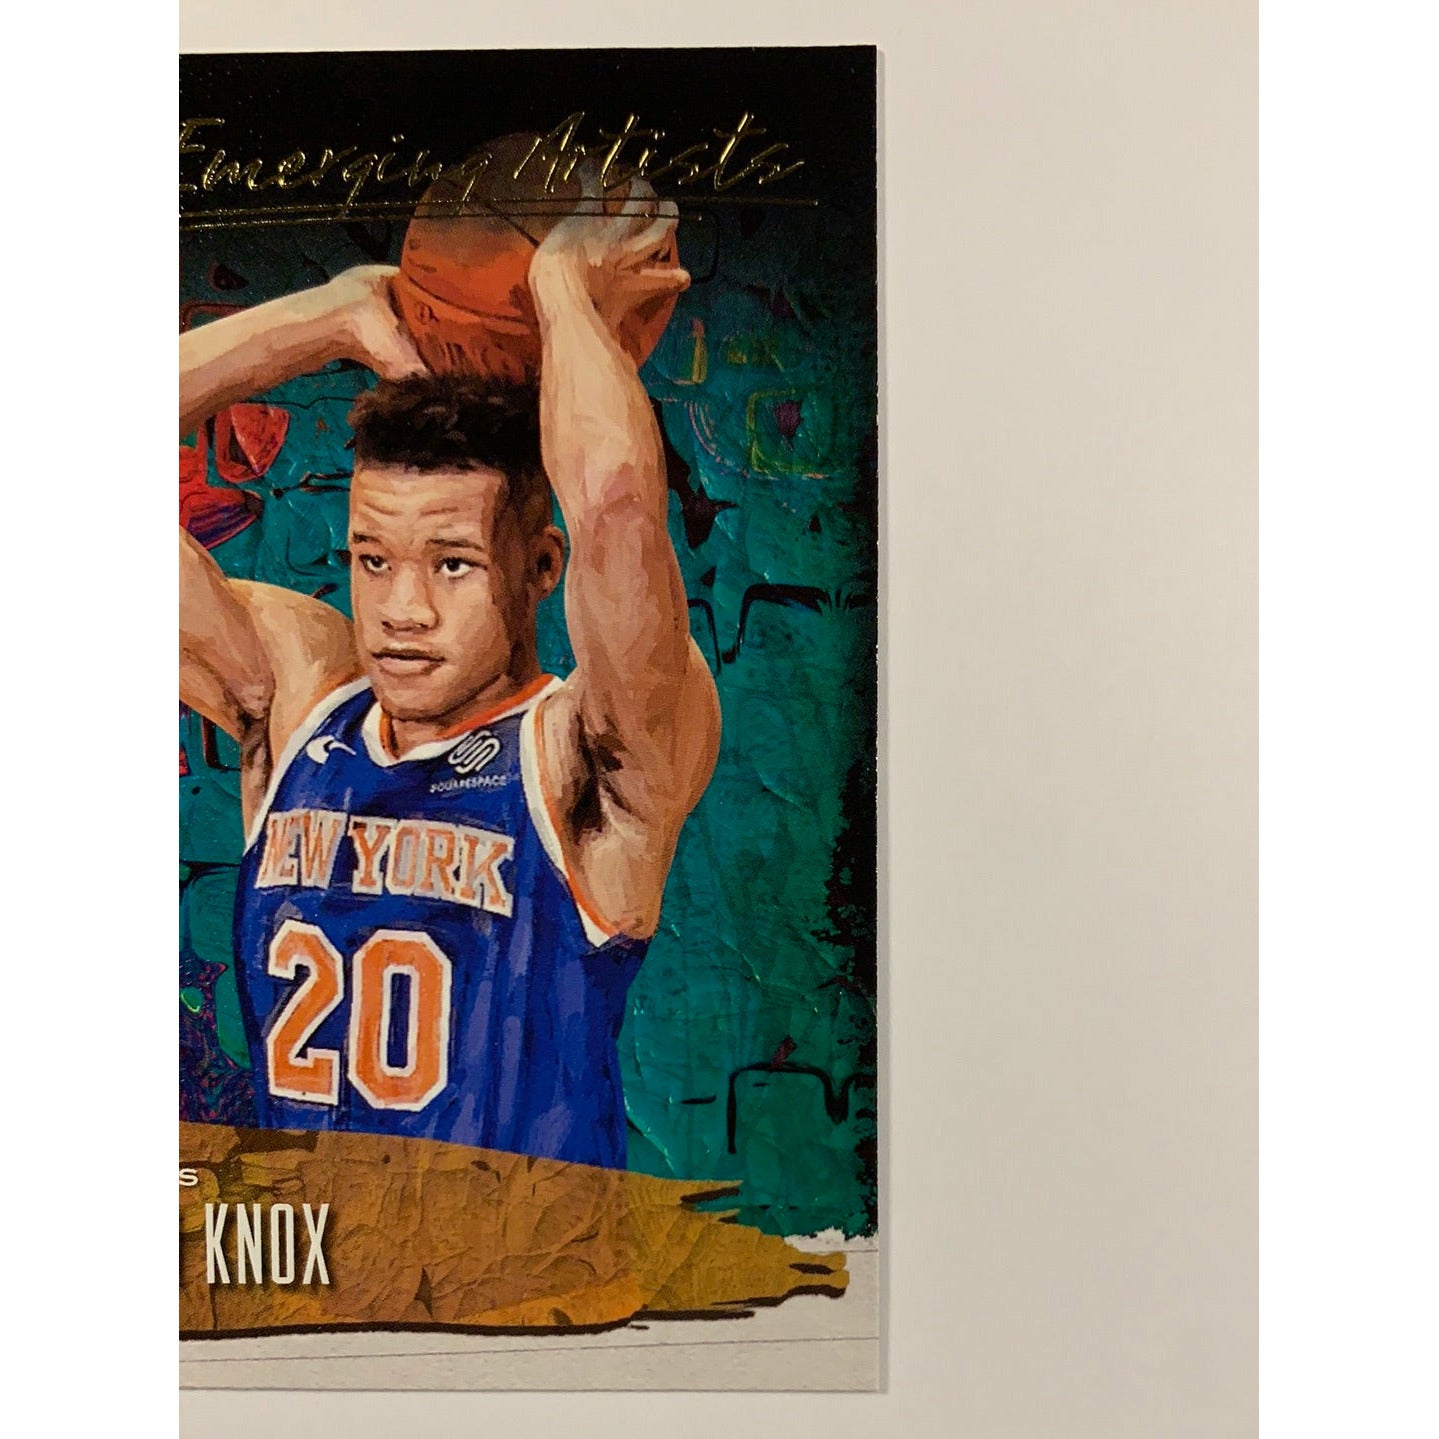  2019-20 Court Kings Kevin Knox Emerging Artists  Local Legends Cards & Collectibles